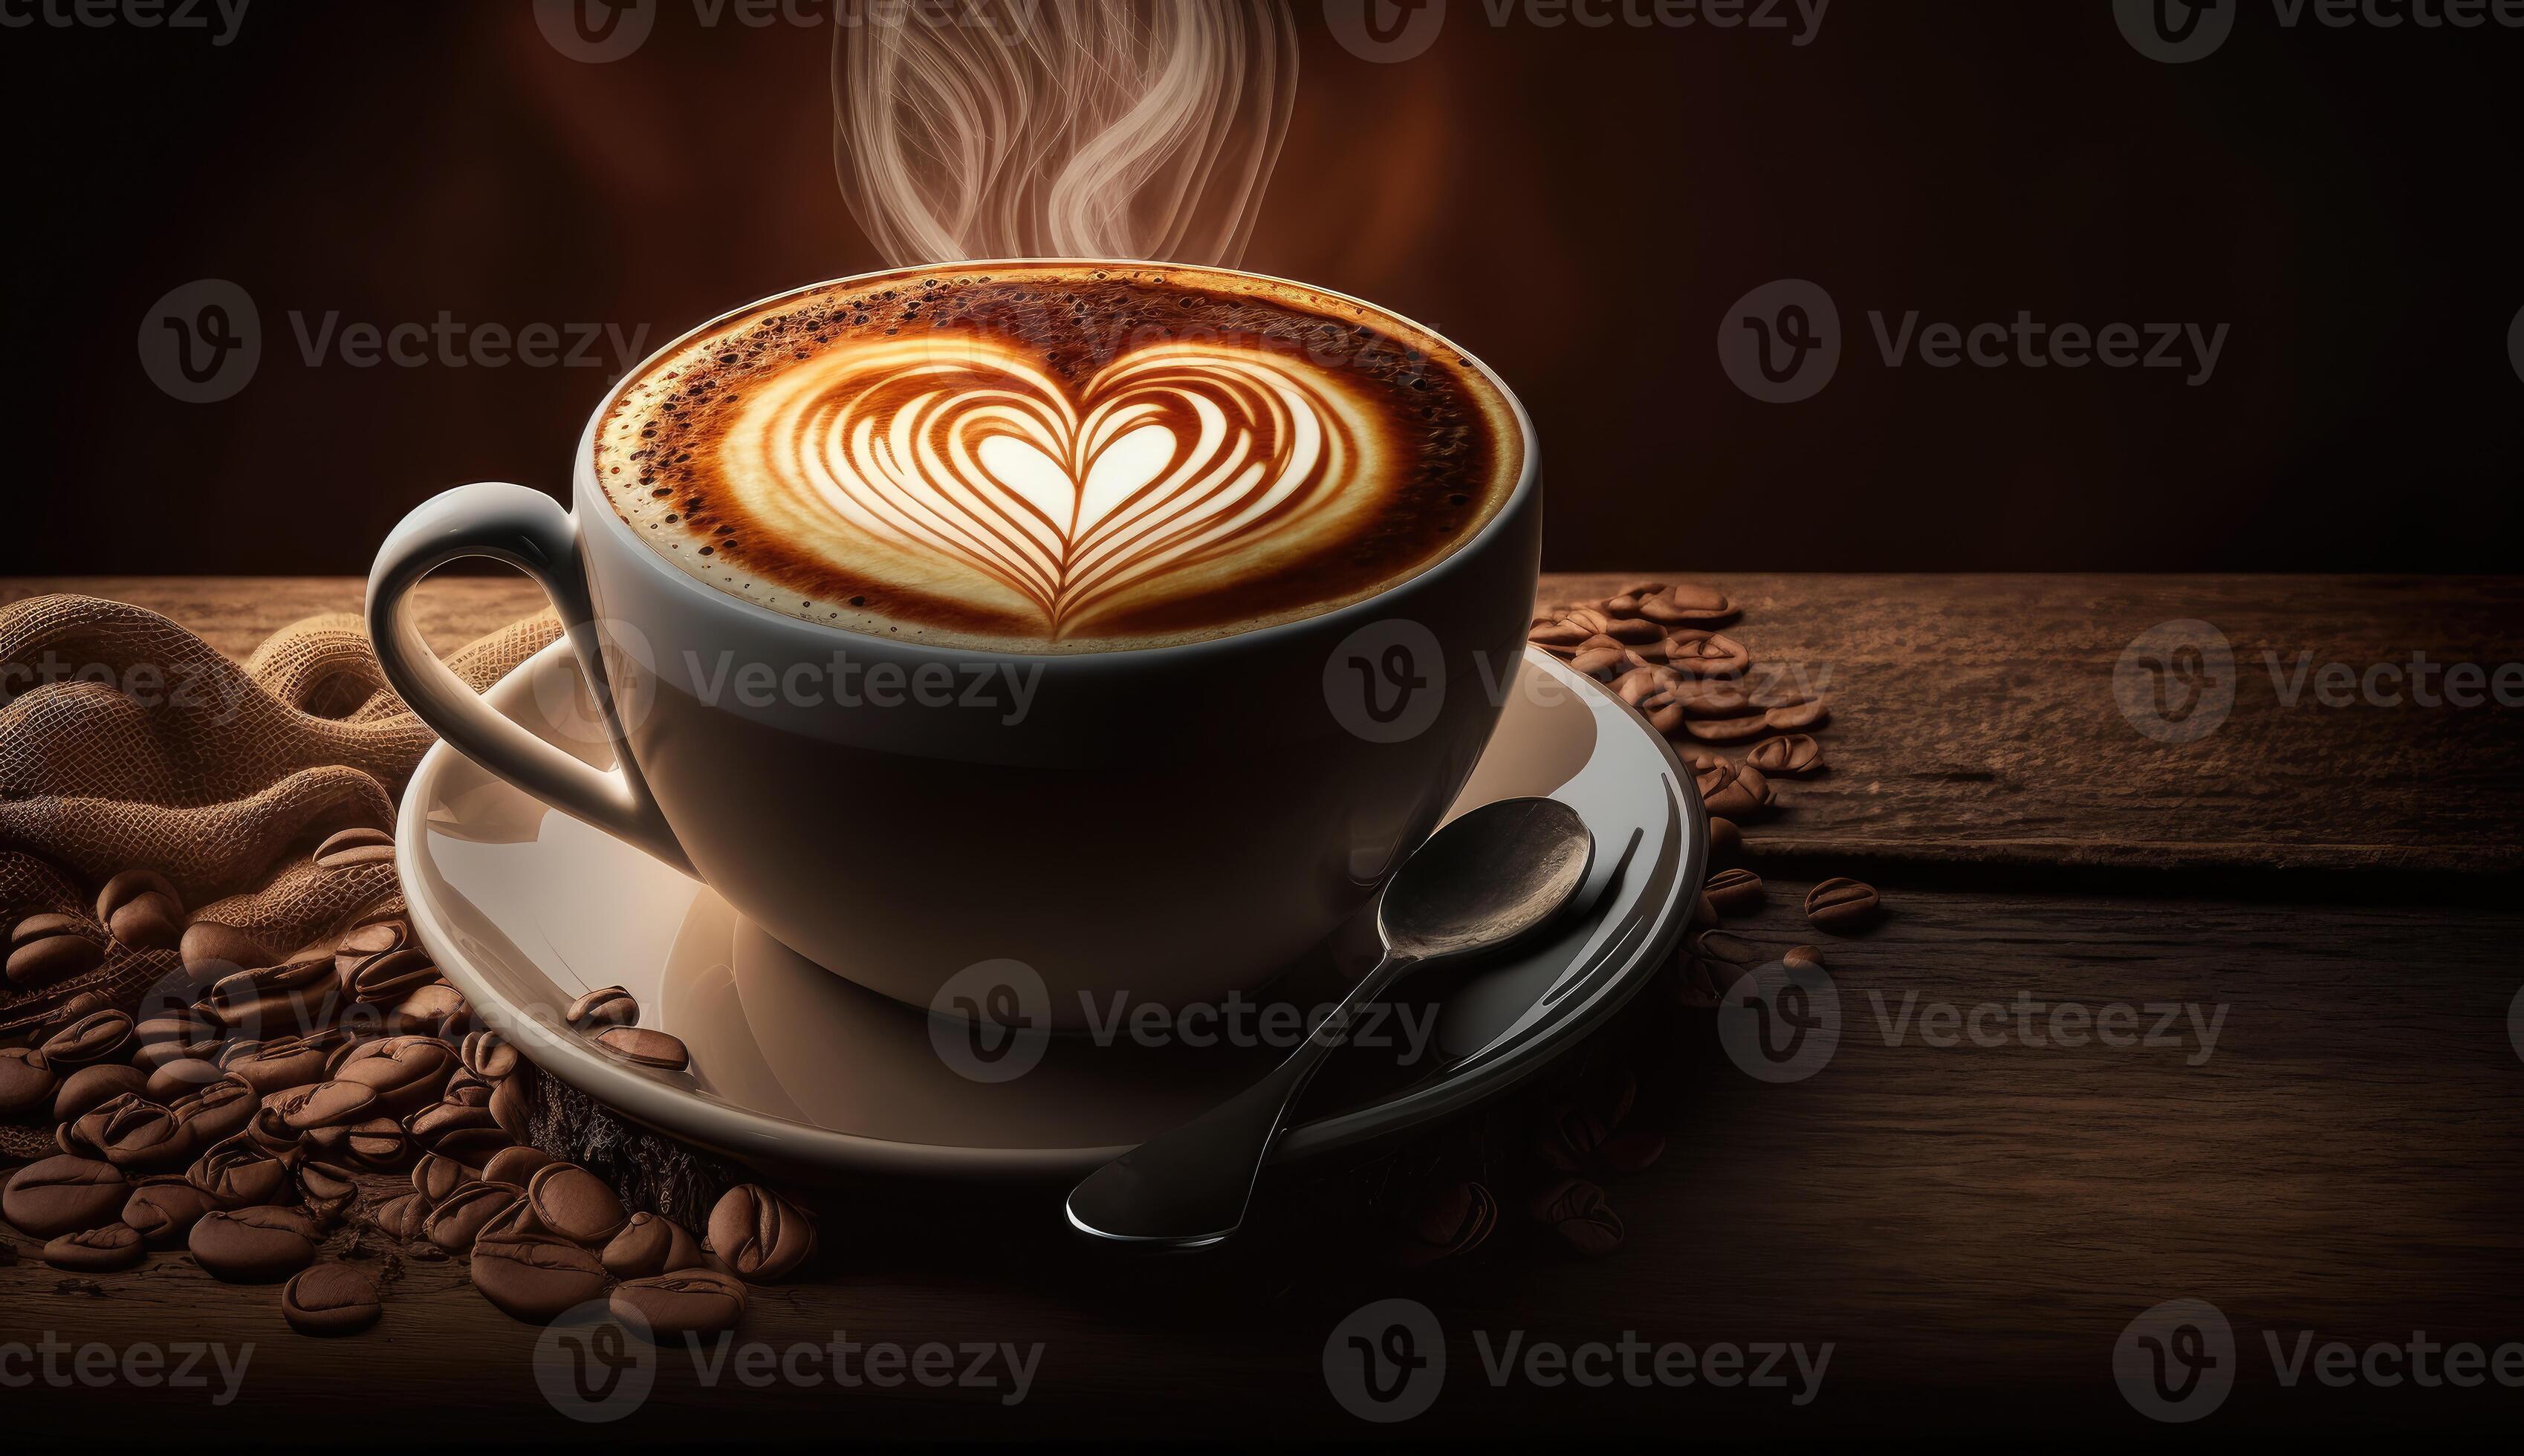 https://static.vecteezy.com/system/resources/previews/022/993/482/large_2x/coffee-latte-with-creamy-and-foam-in-cup-and-latte-art-shape-on-dark-wooden-table-with-coffee-beans-decoration-calm-and-relax-coffee-relaxation-time-hot-beverage-with-generative-ai-photo.jpeg